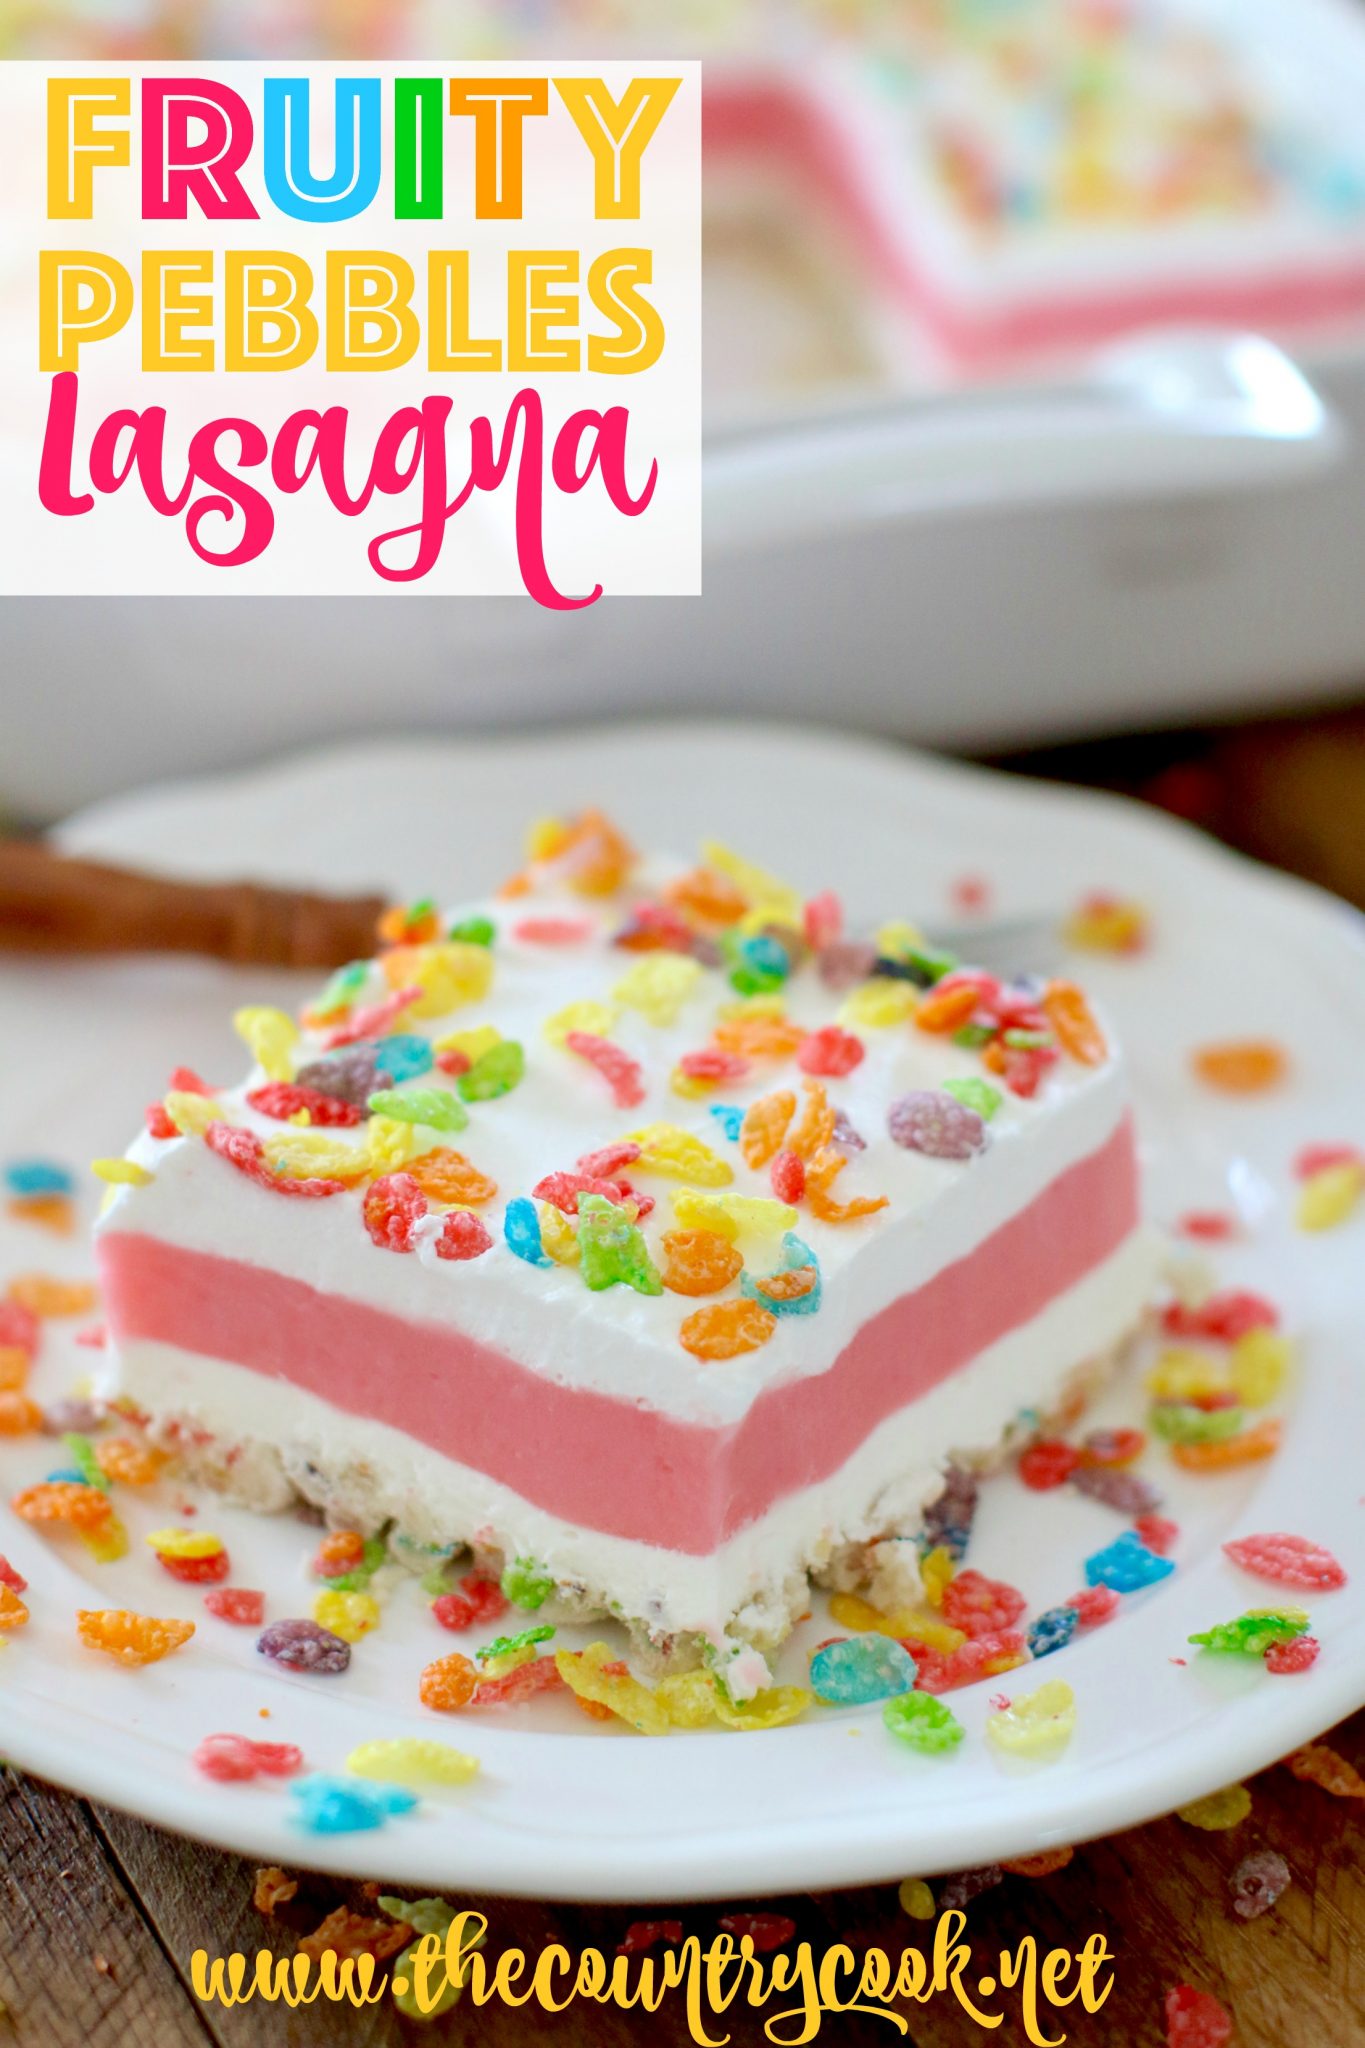 Fruity Pebbles Lasagna - The Country Cook